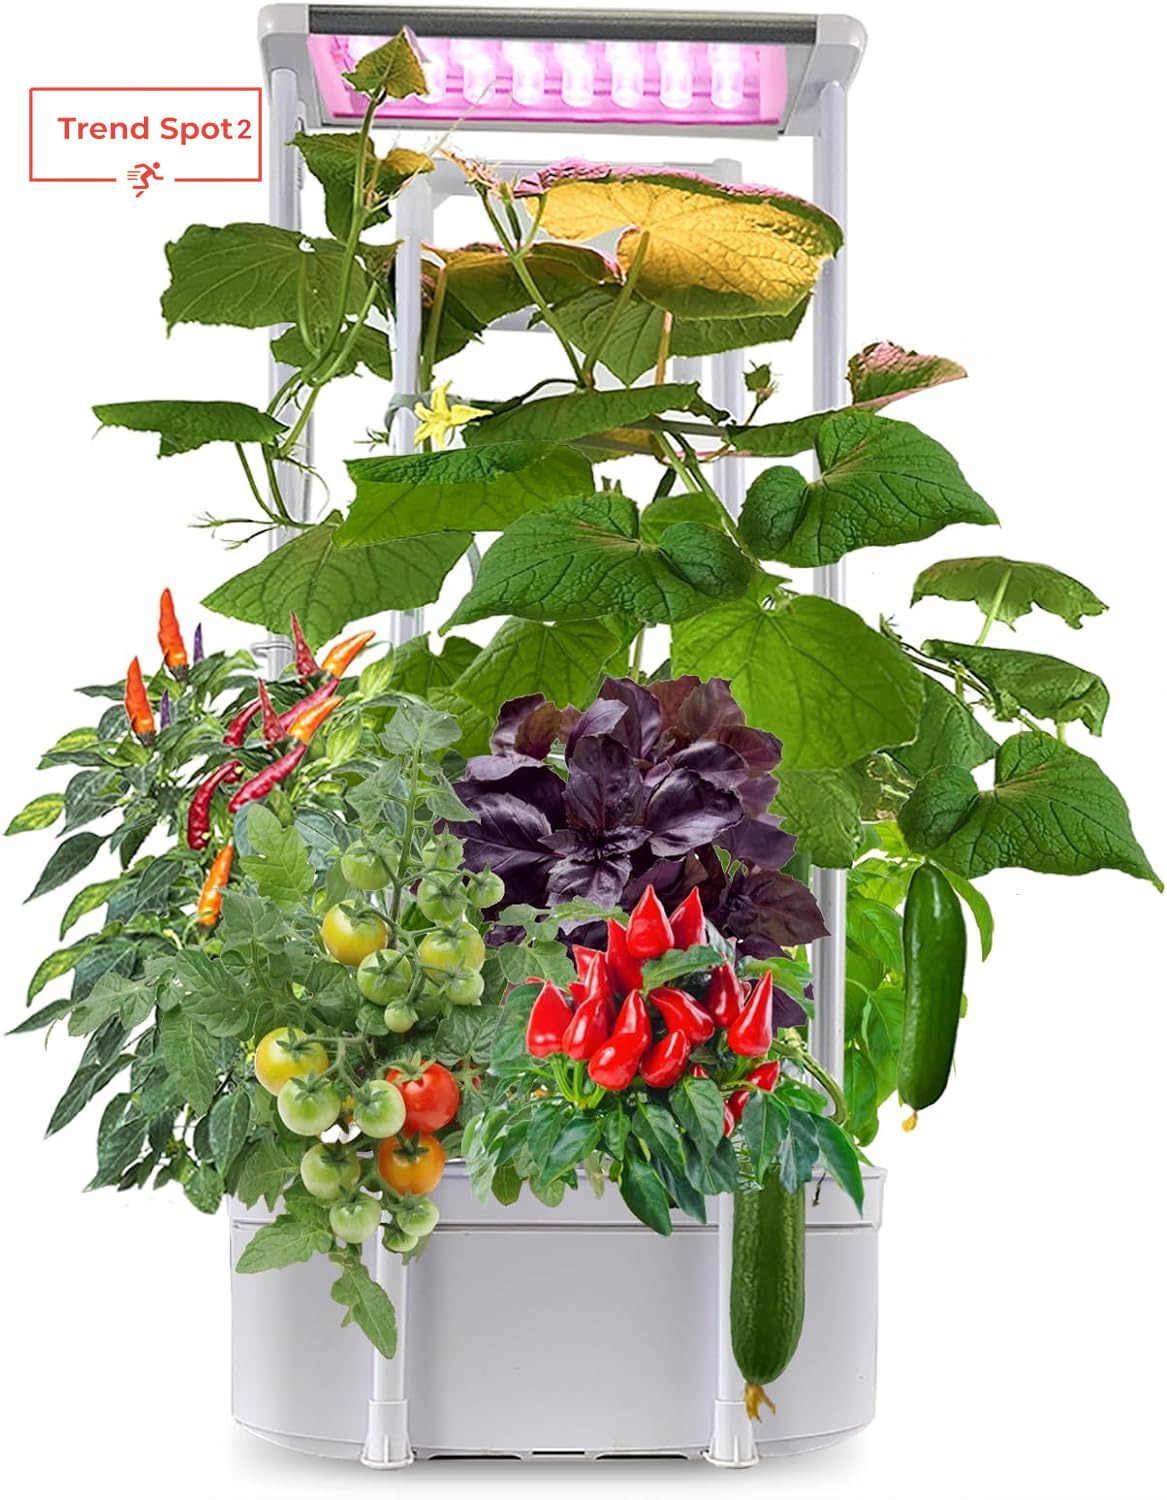 Hydroponics Growing System,Smart Hydroponic Gardening System with LED Grow Light